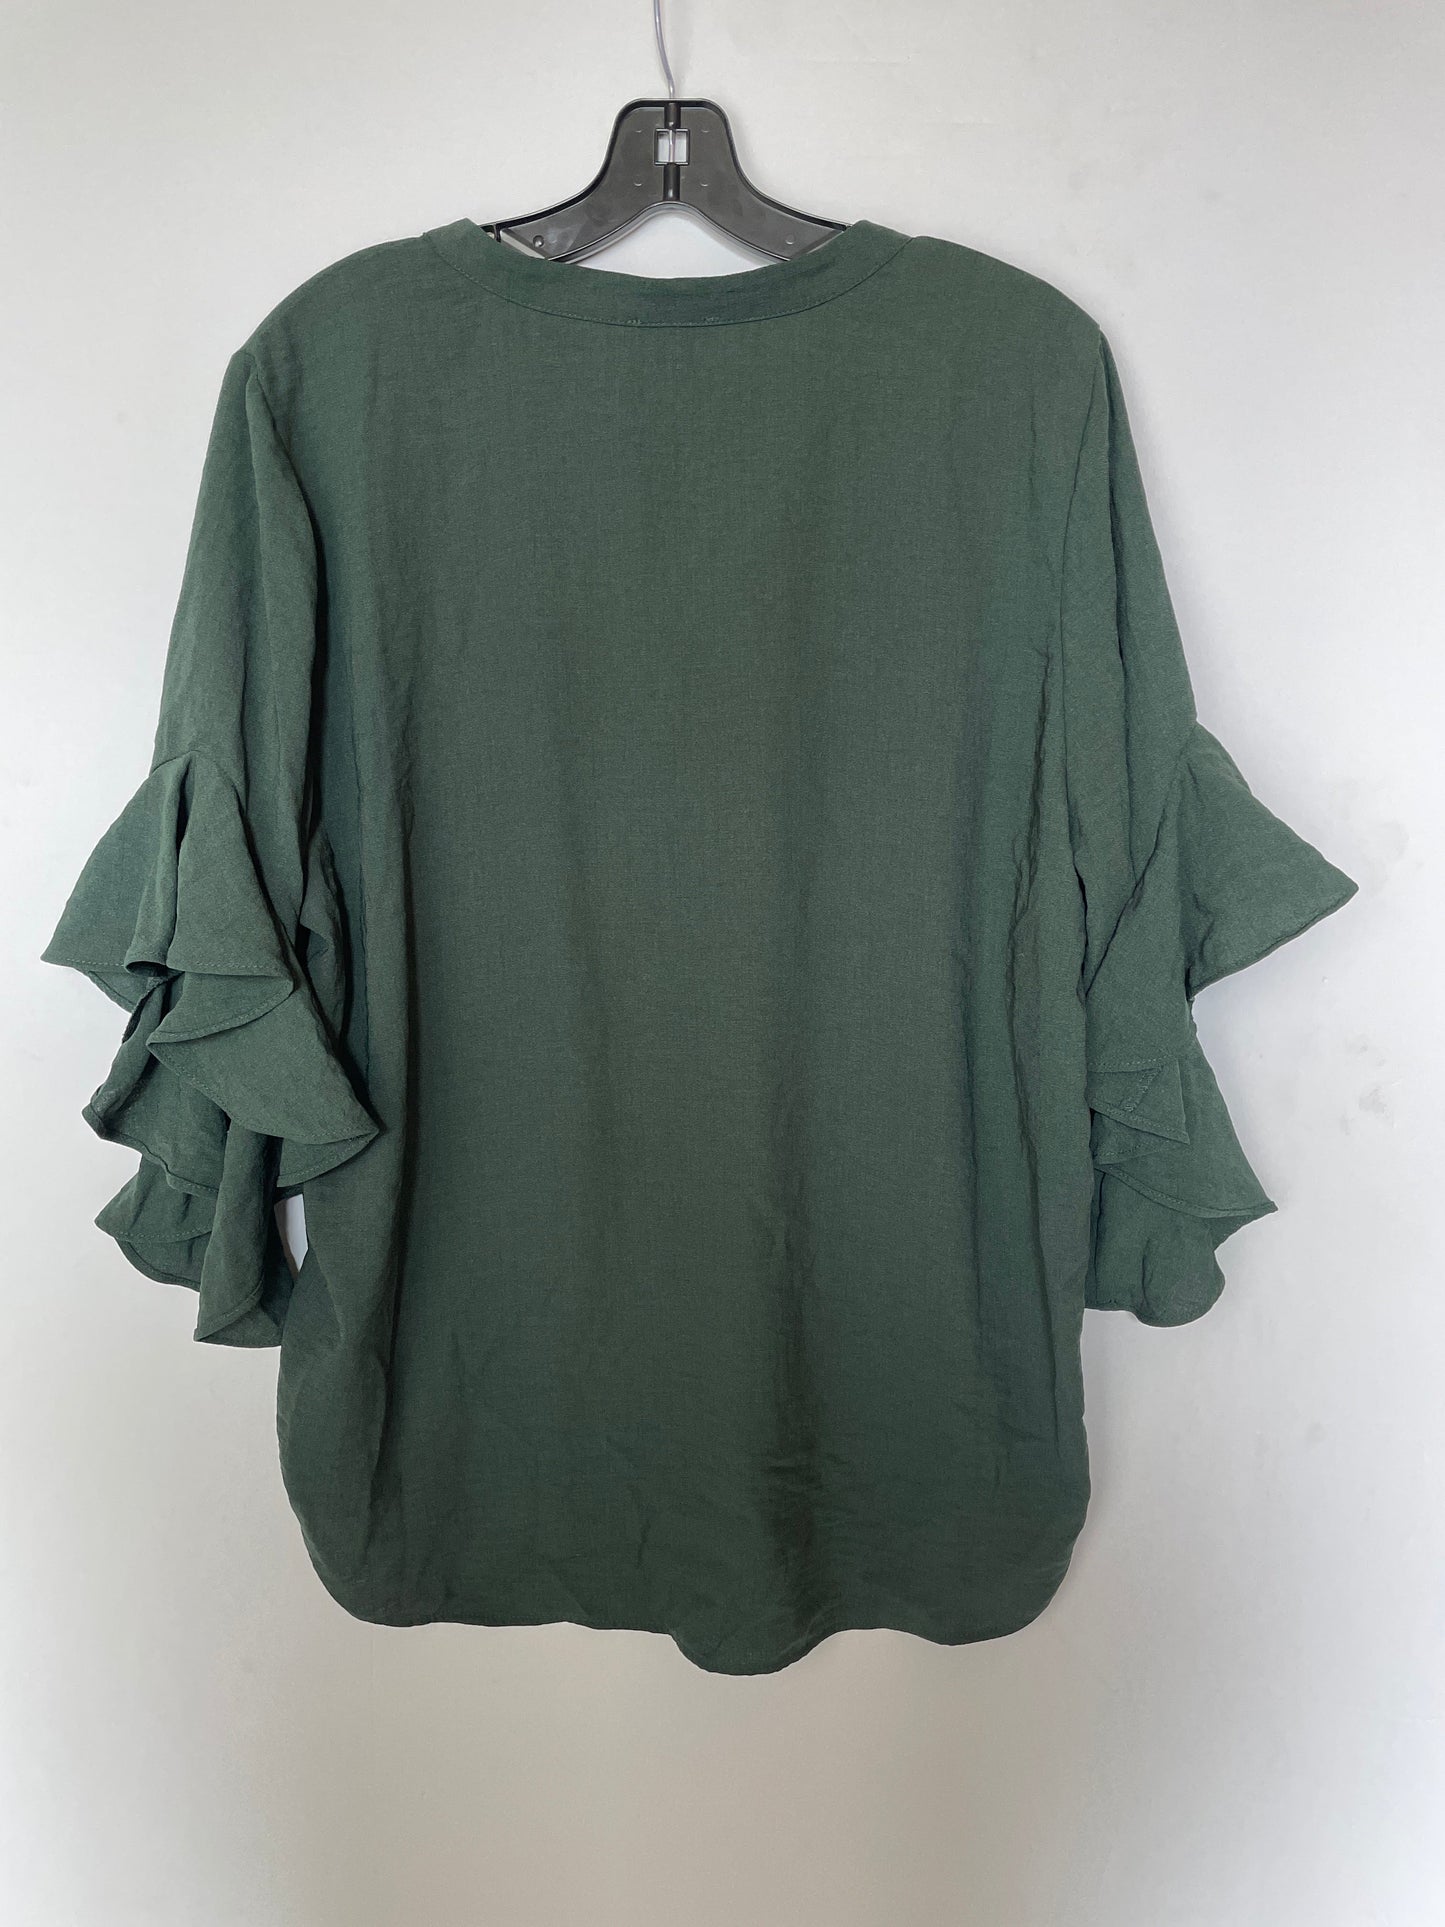 Green Top Short Sleeve Vince Camuto, Size Xl